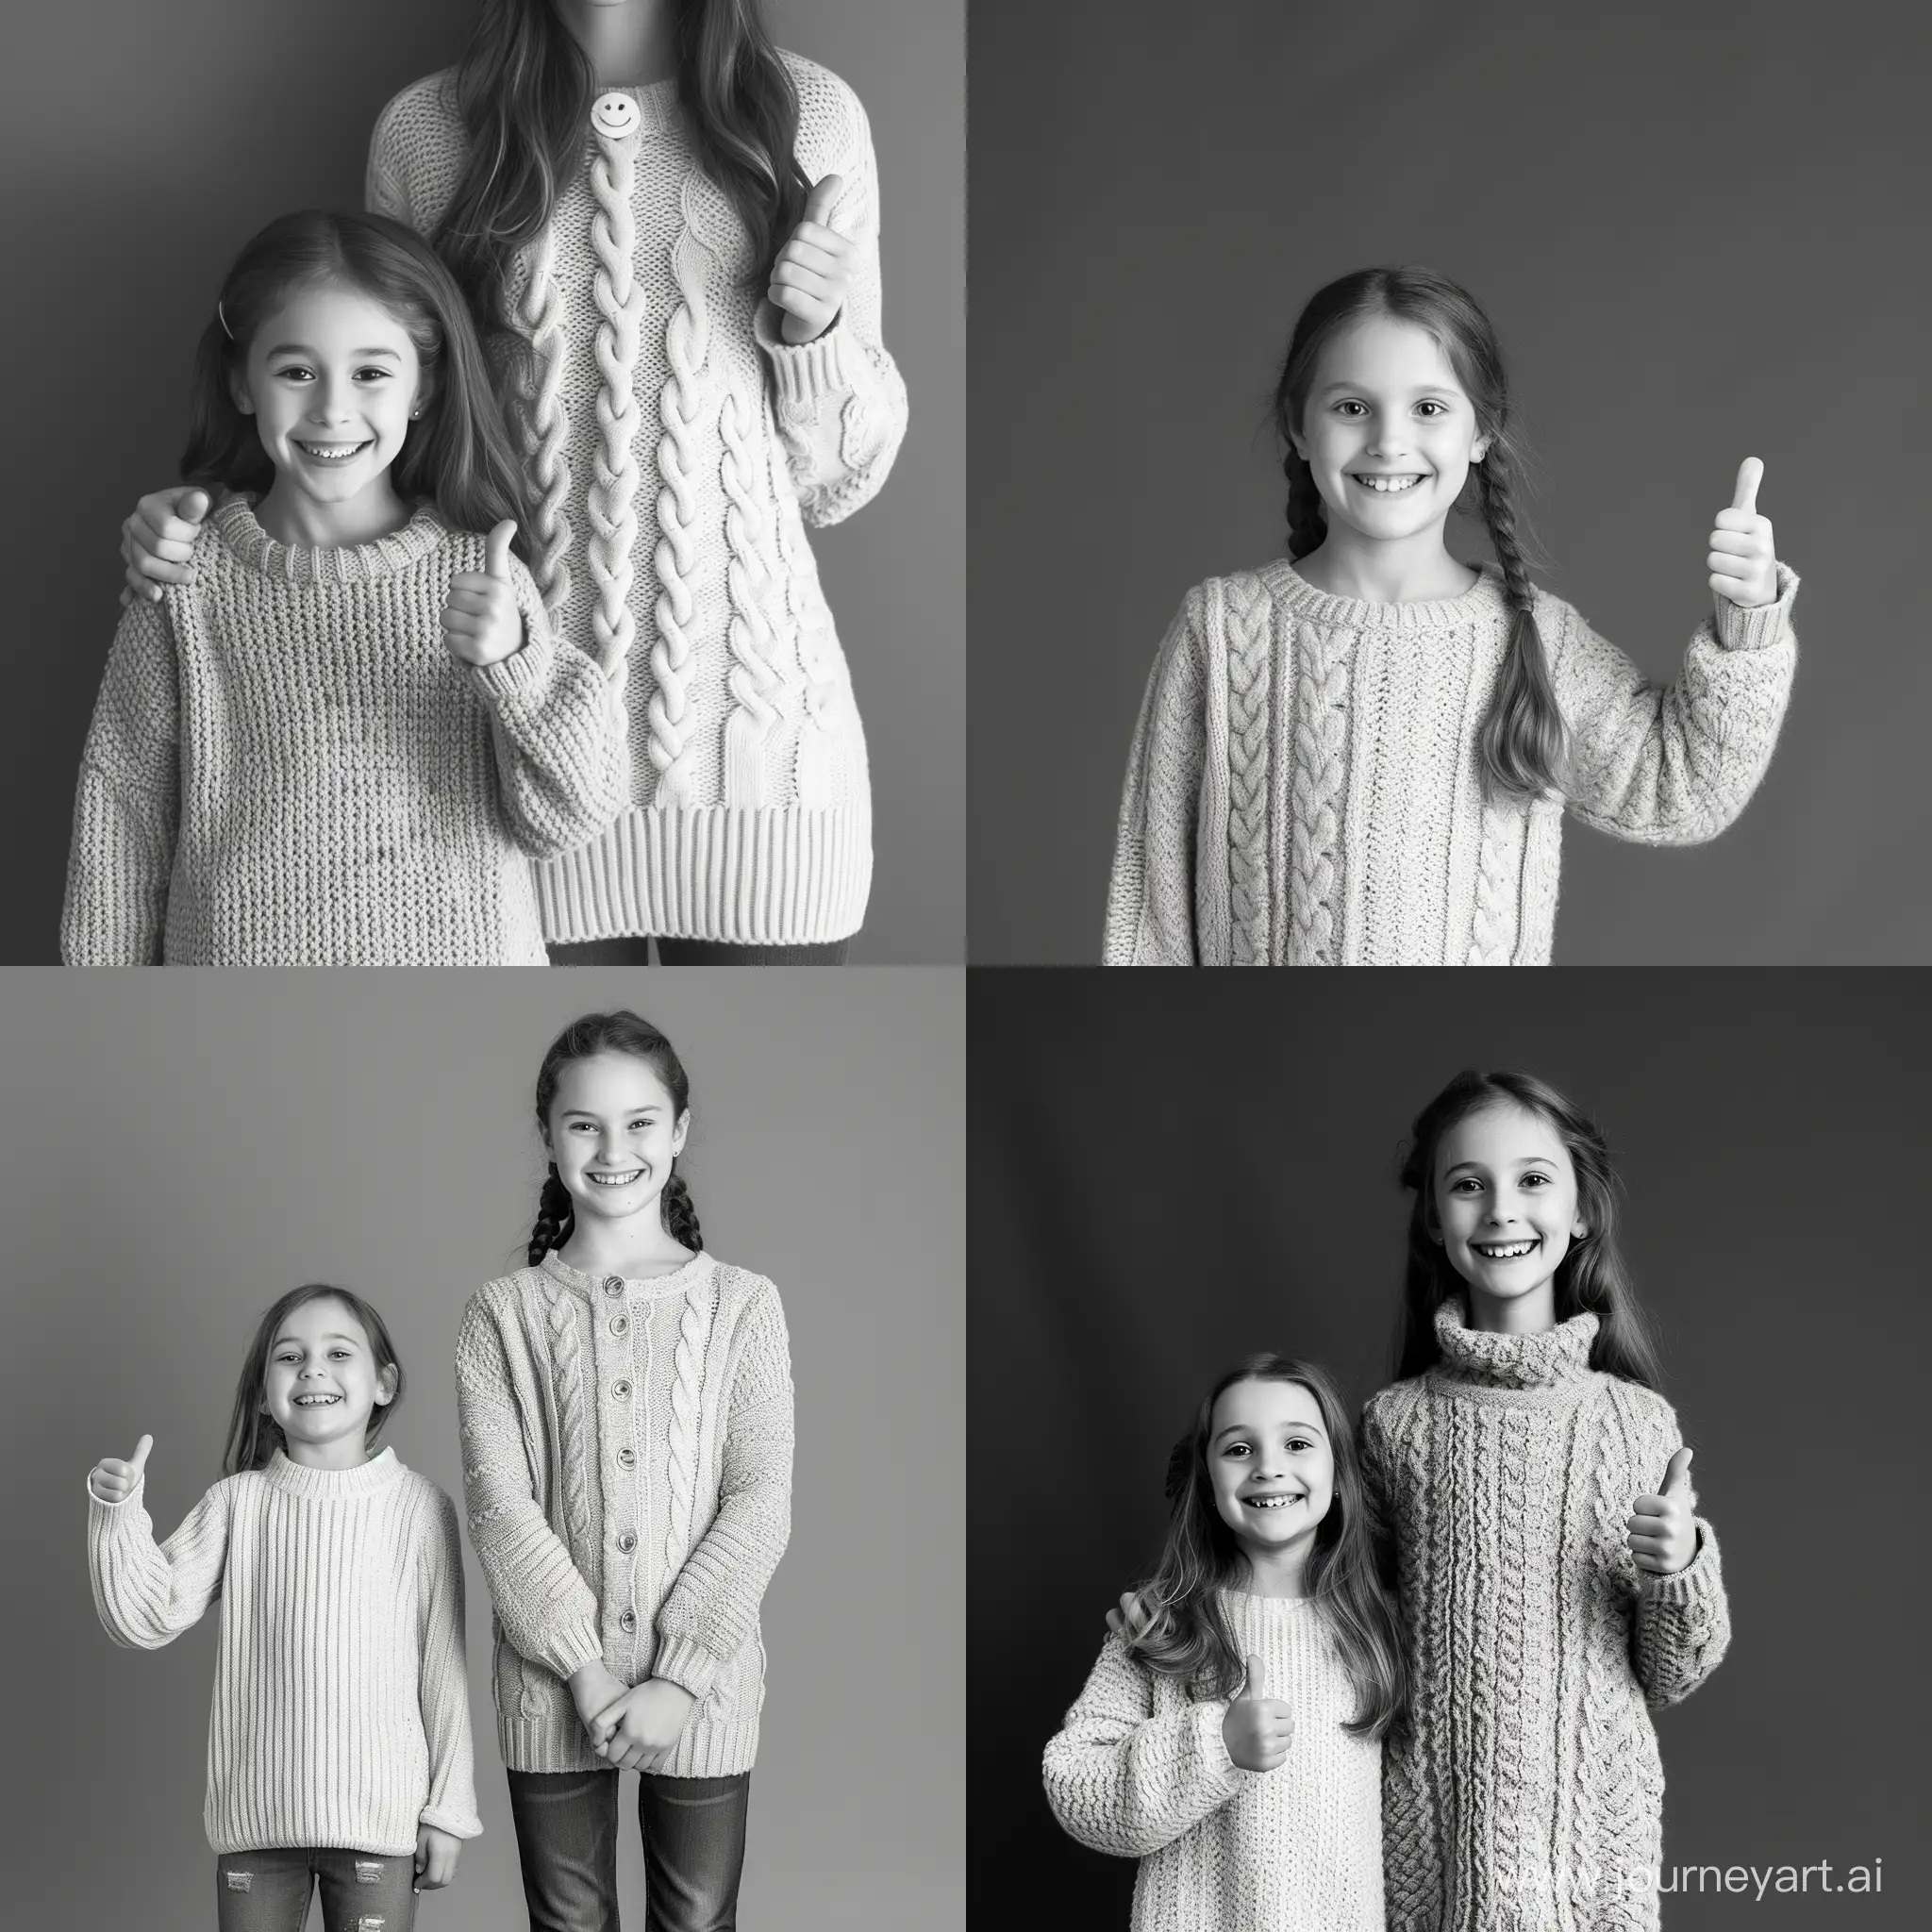 Cheerful-TenYearOld-Girl-in-LightColored-Sweater-Gives-Thumbs-Up